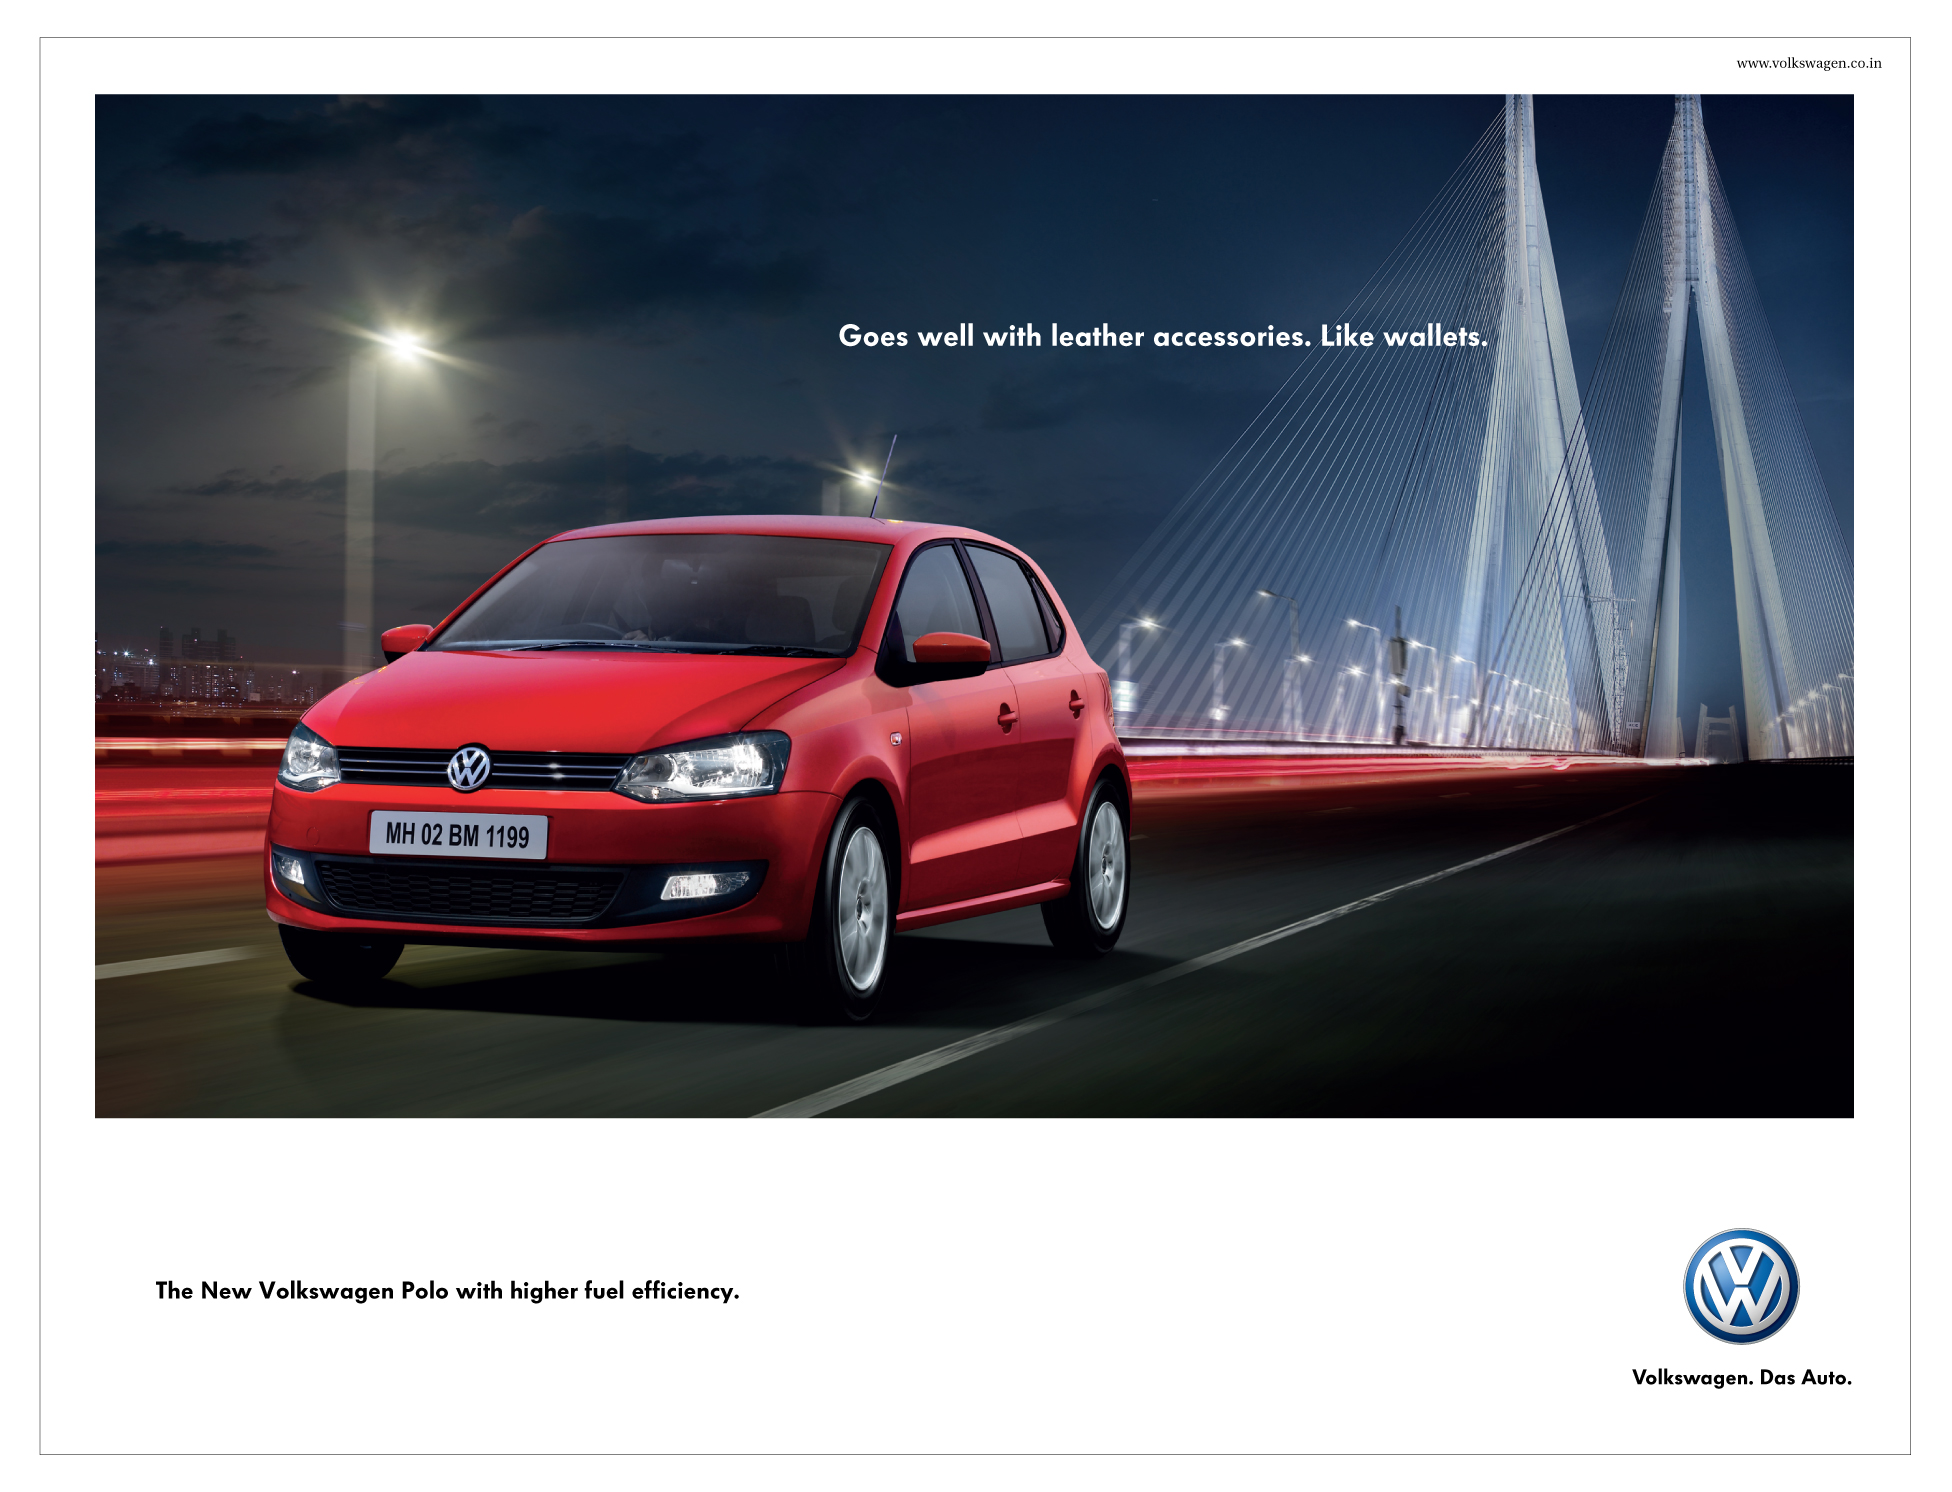 A magazine ad that I wrote for VW while at DDB Mudra, Mumbai.